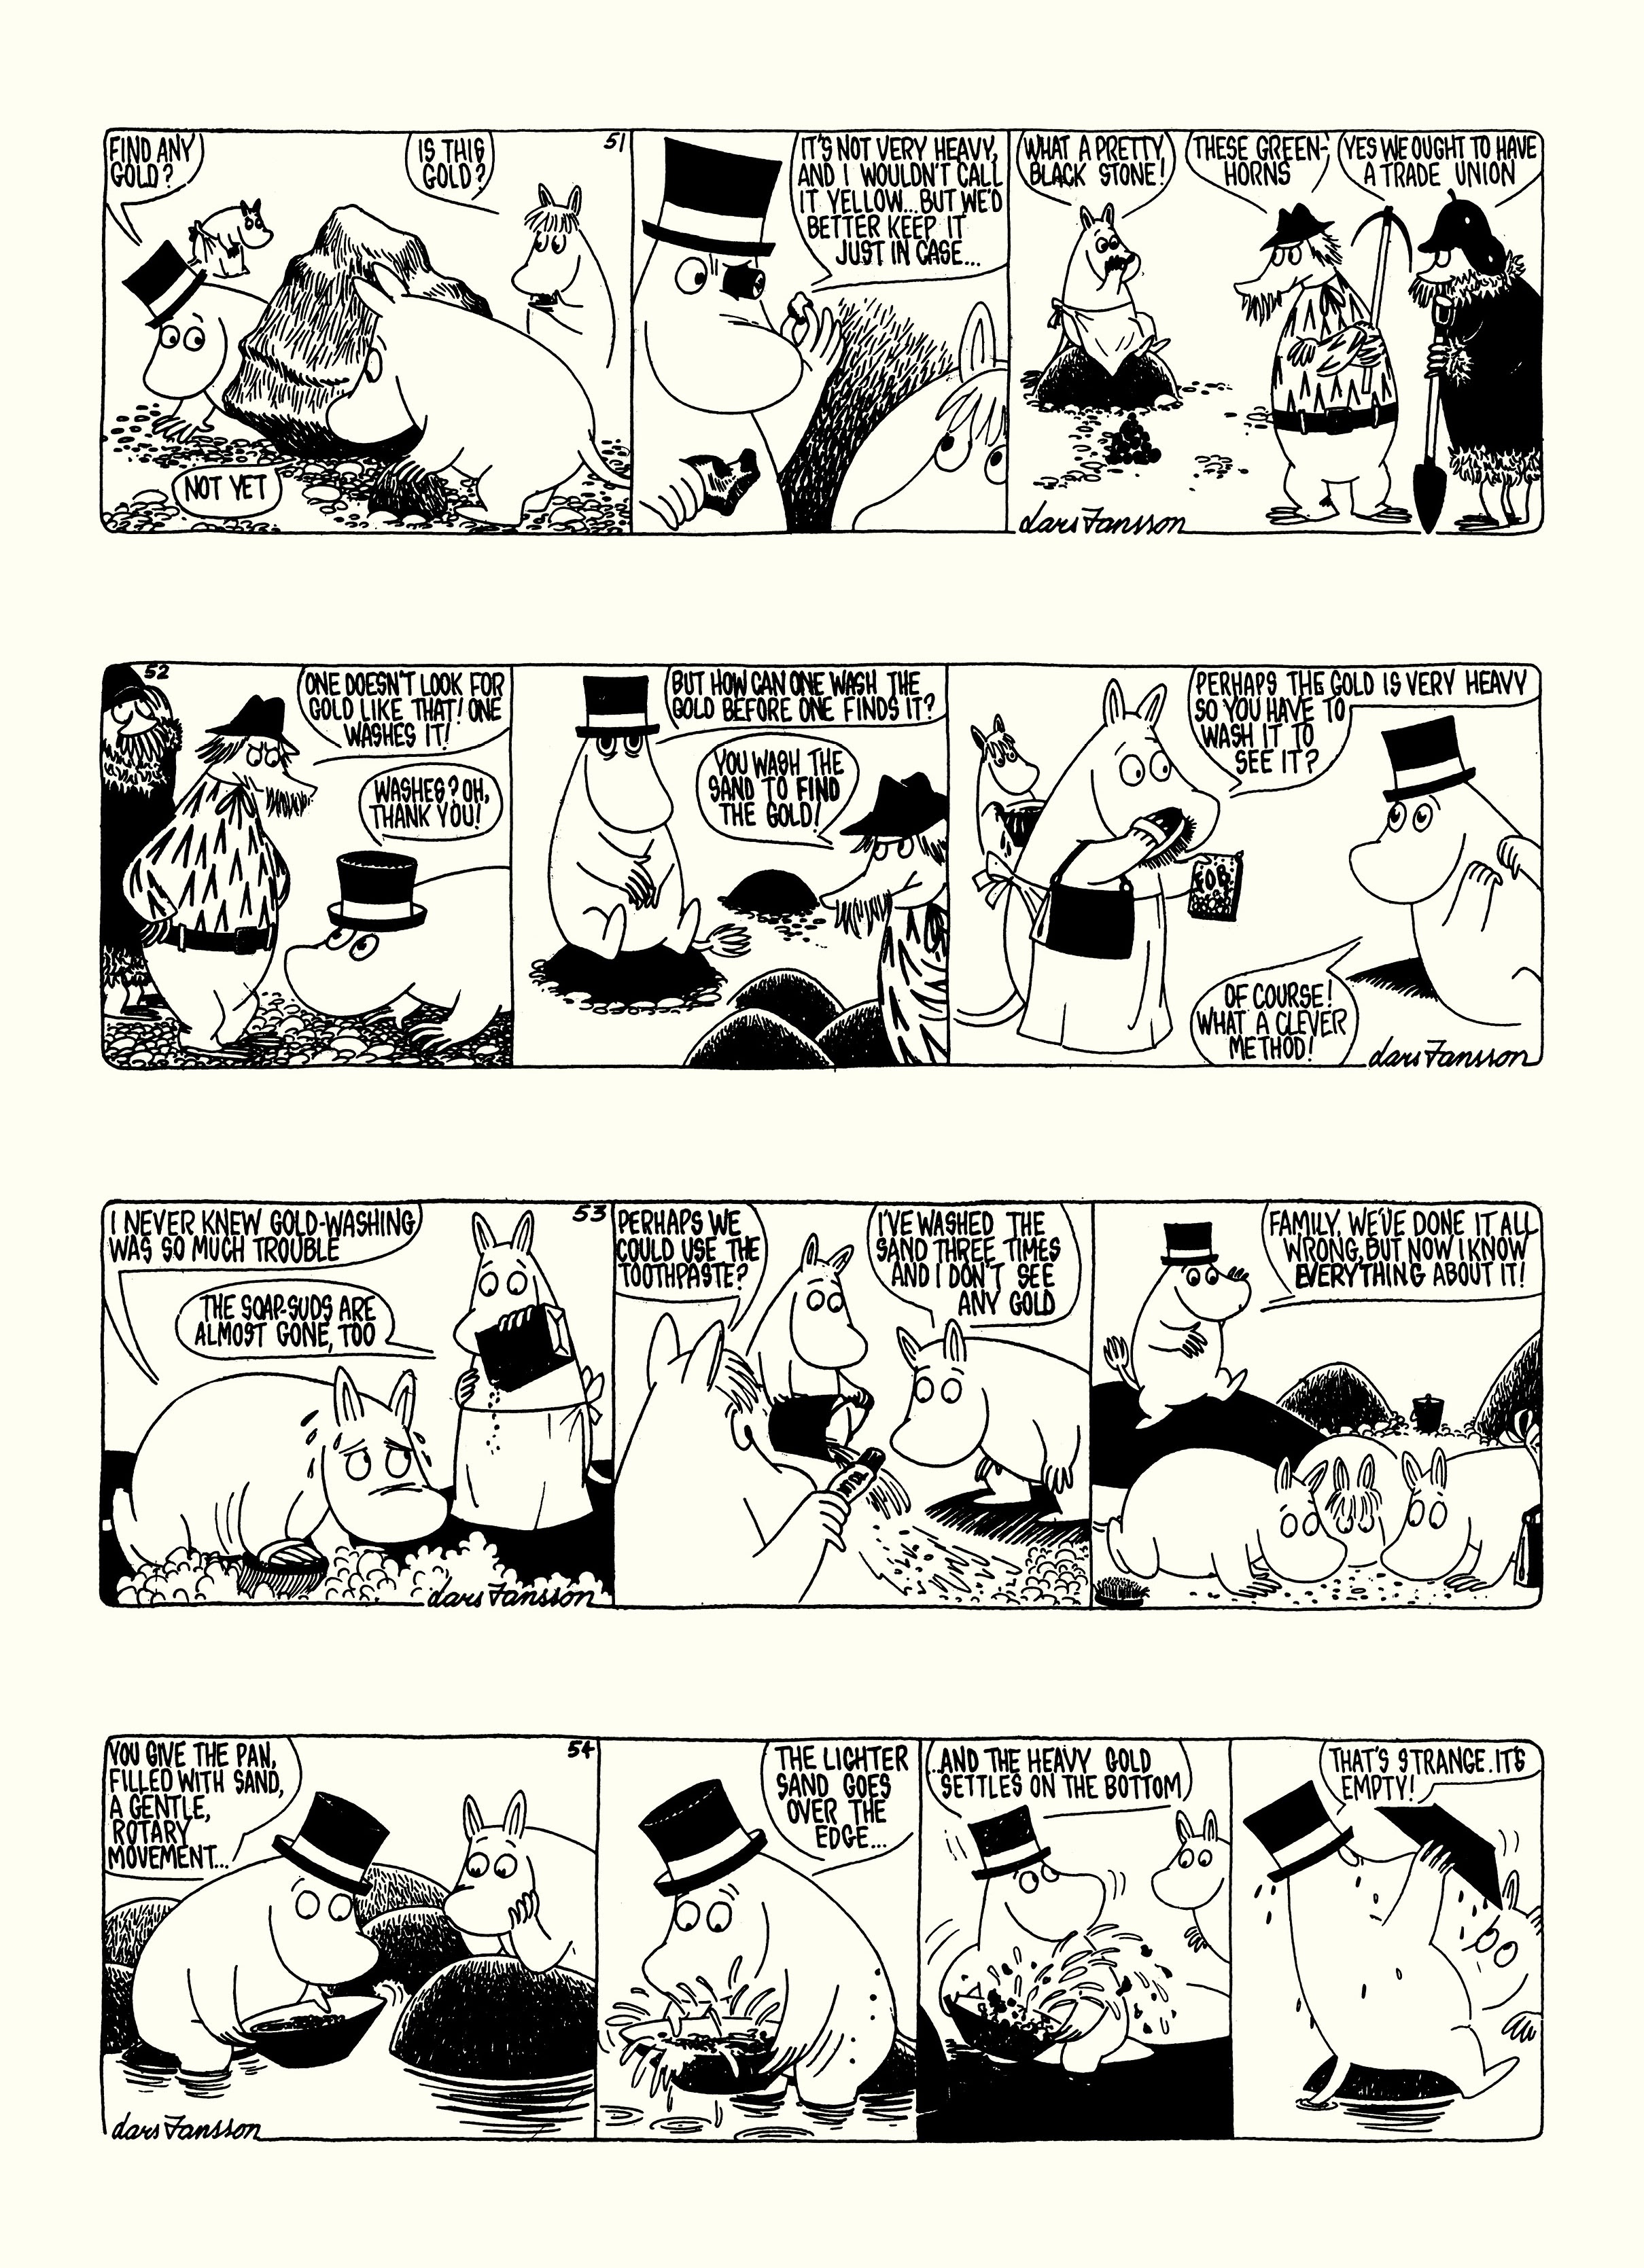 Read online Moomin: The Complete Lars Jansson Comic Strip comic -  Issue # TPB 7 - 82